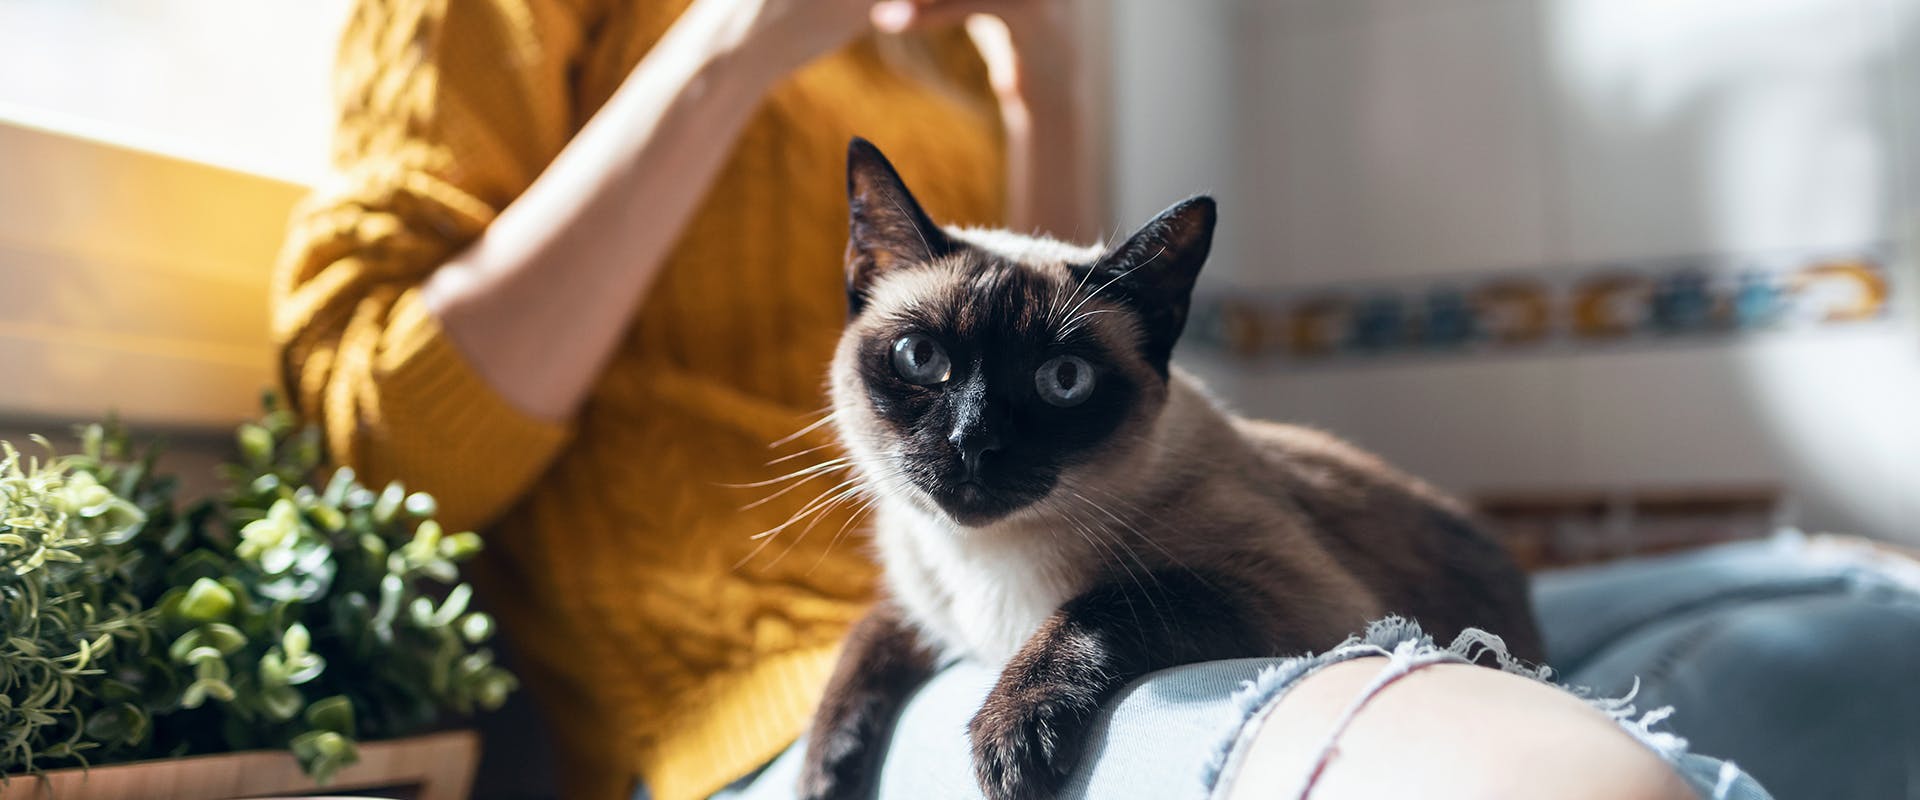 A Siamese cat sitting on a woman's lap